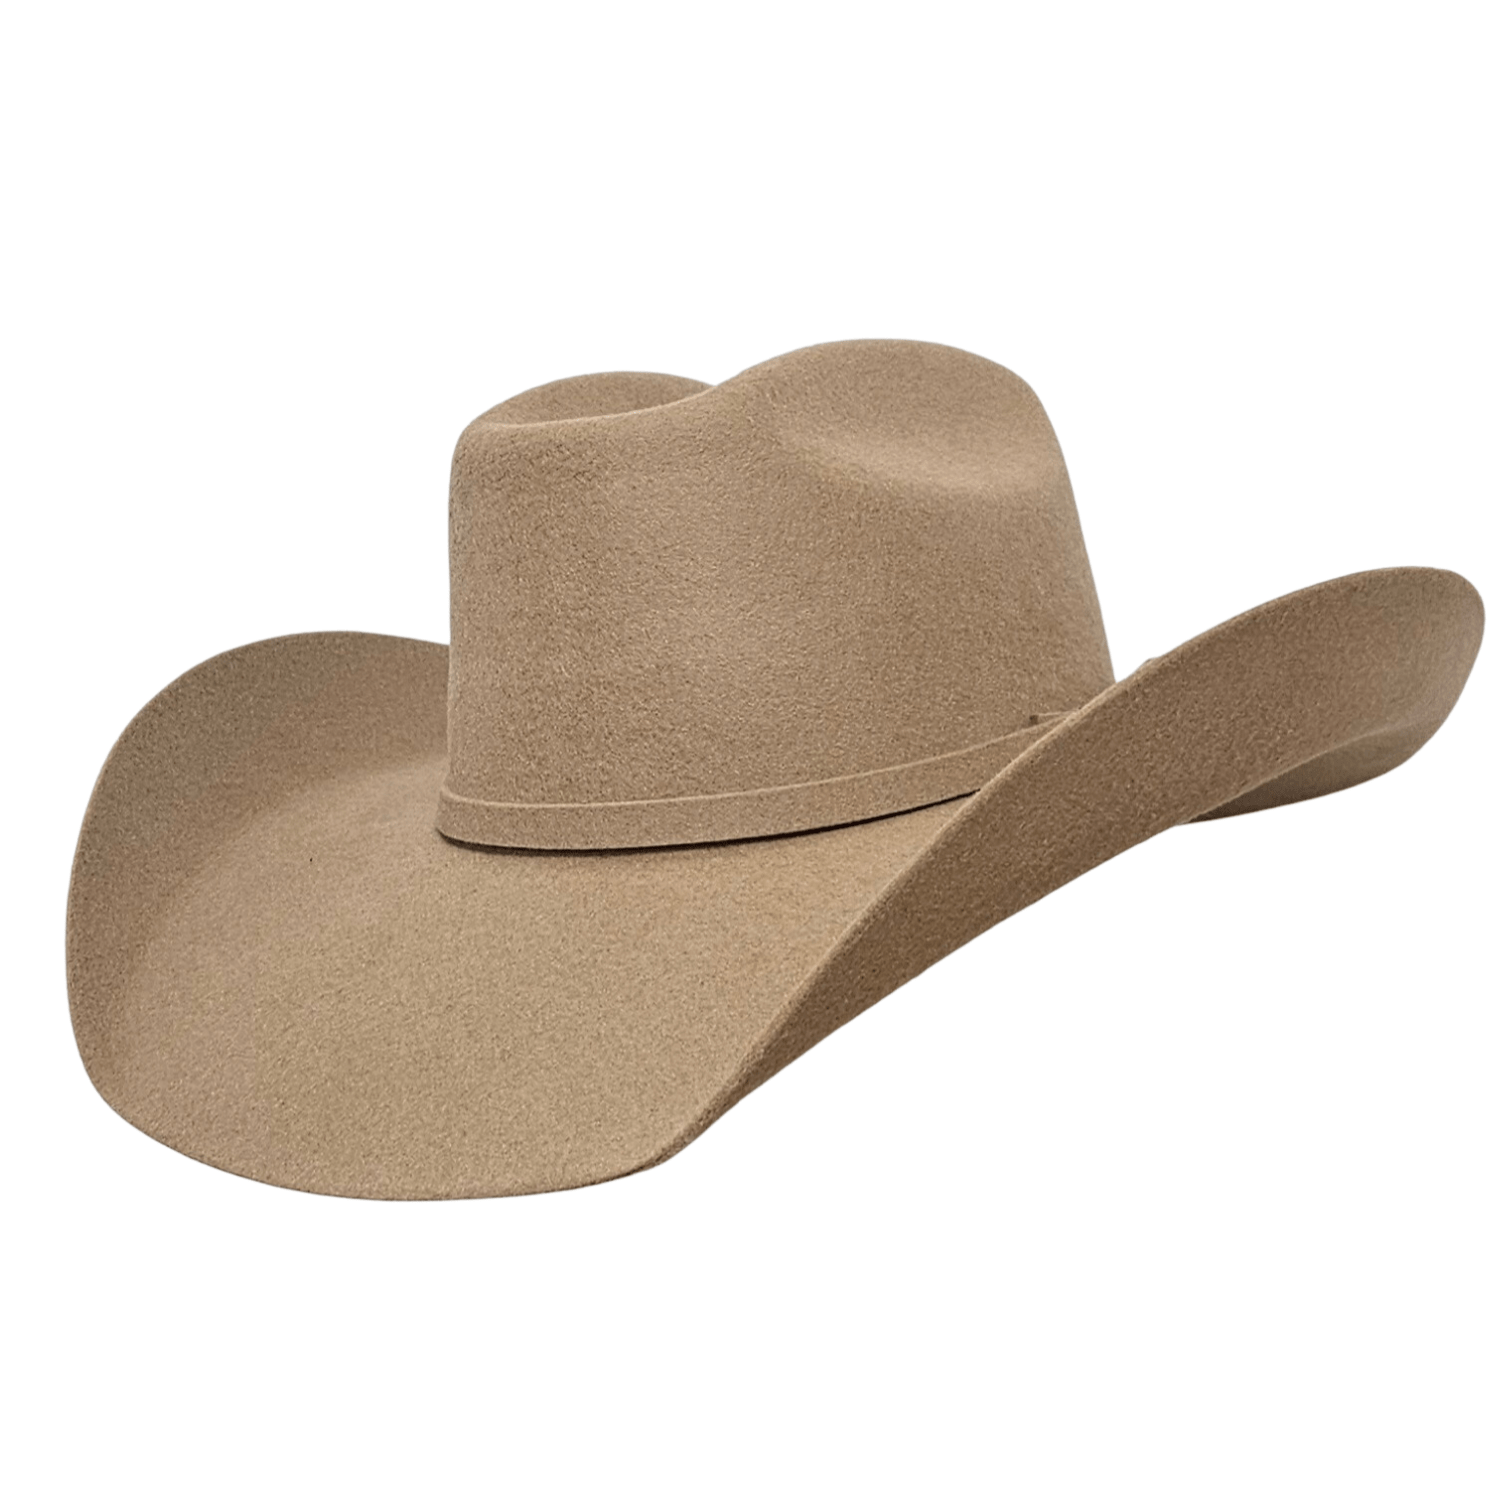 Gone Country Hats Men & Women's Hats Cody Chestnut - Wool Cashmere